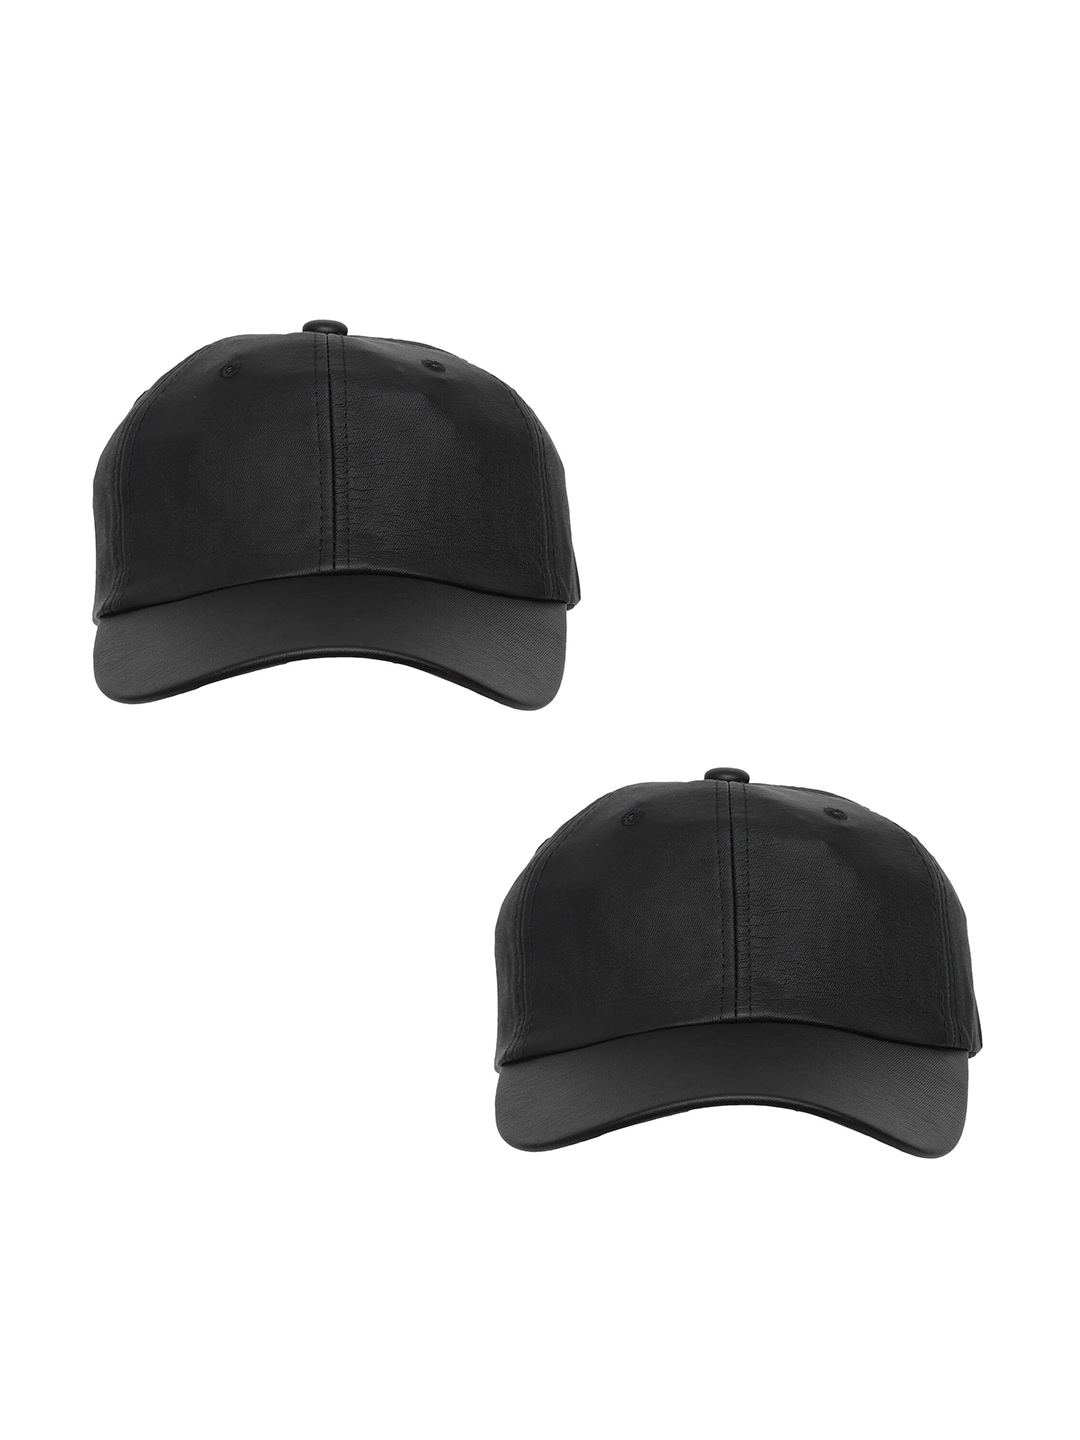 FabSeasons Pack of 2 Unisex Black Solid Baseball Cap with Adjustable Buckle Price in India